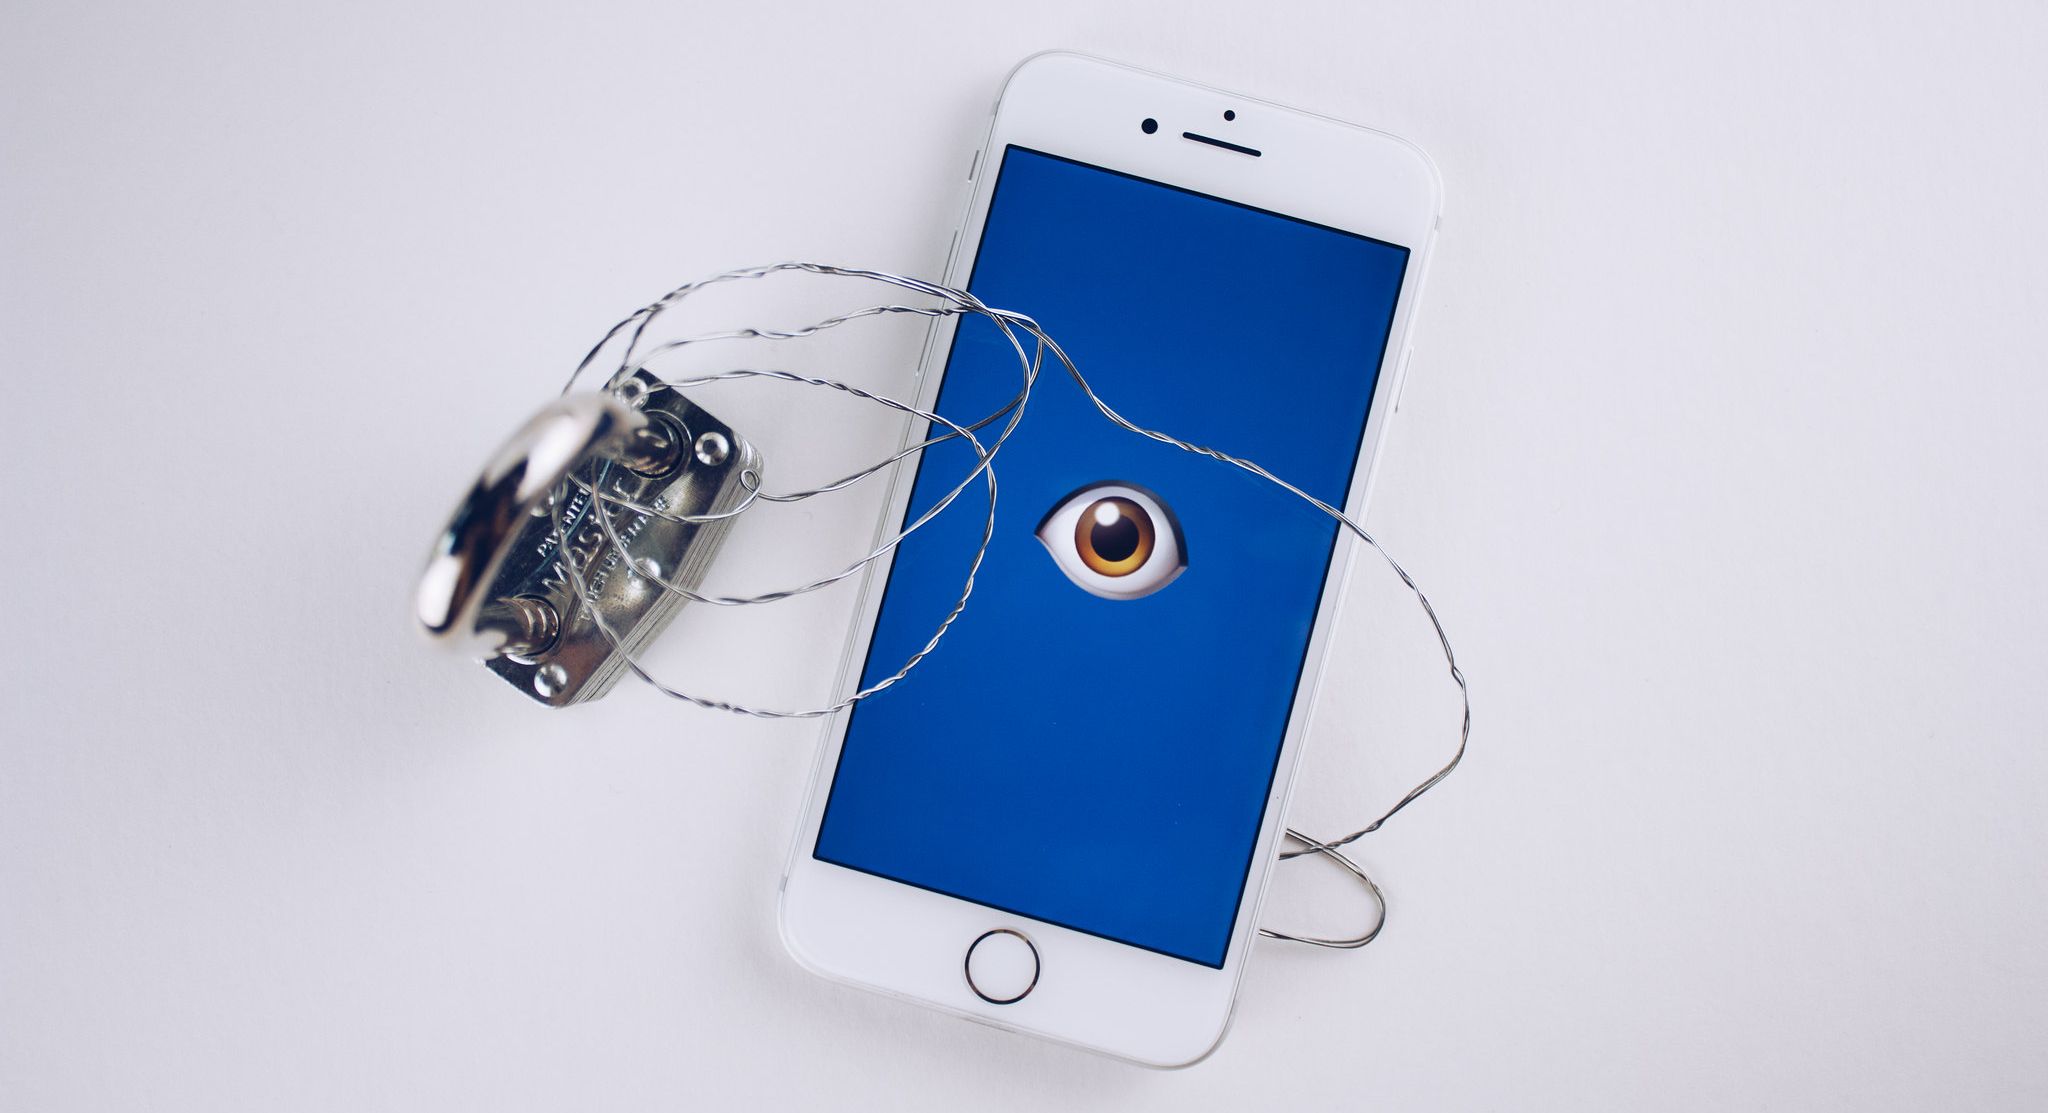 smartphone with eye on screen chained to padlock